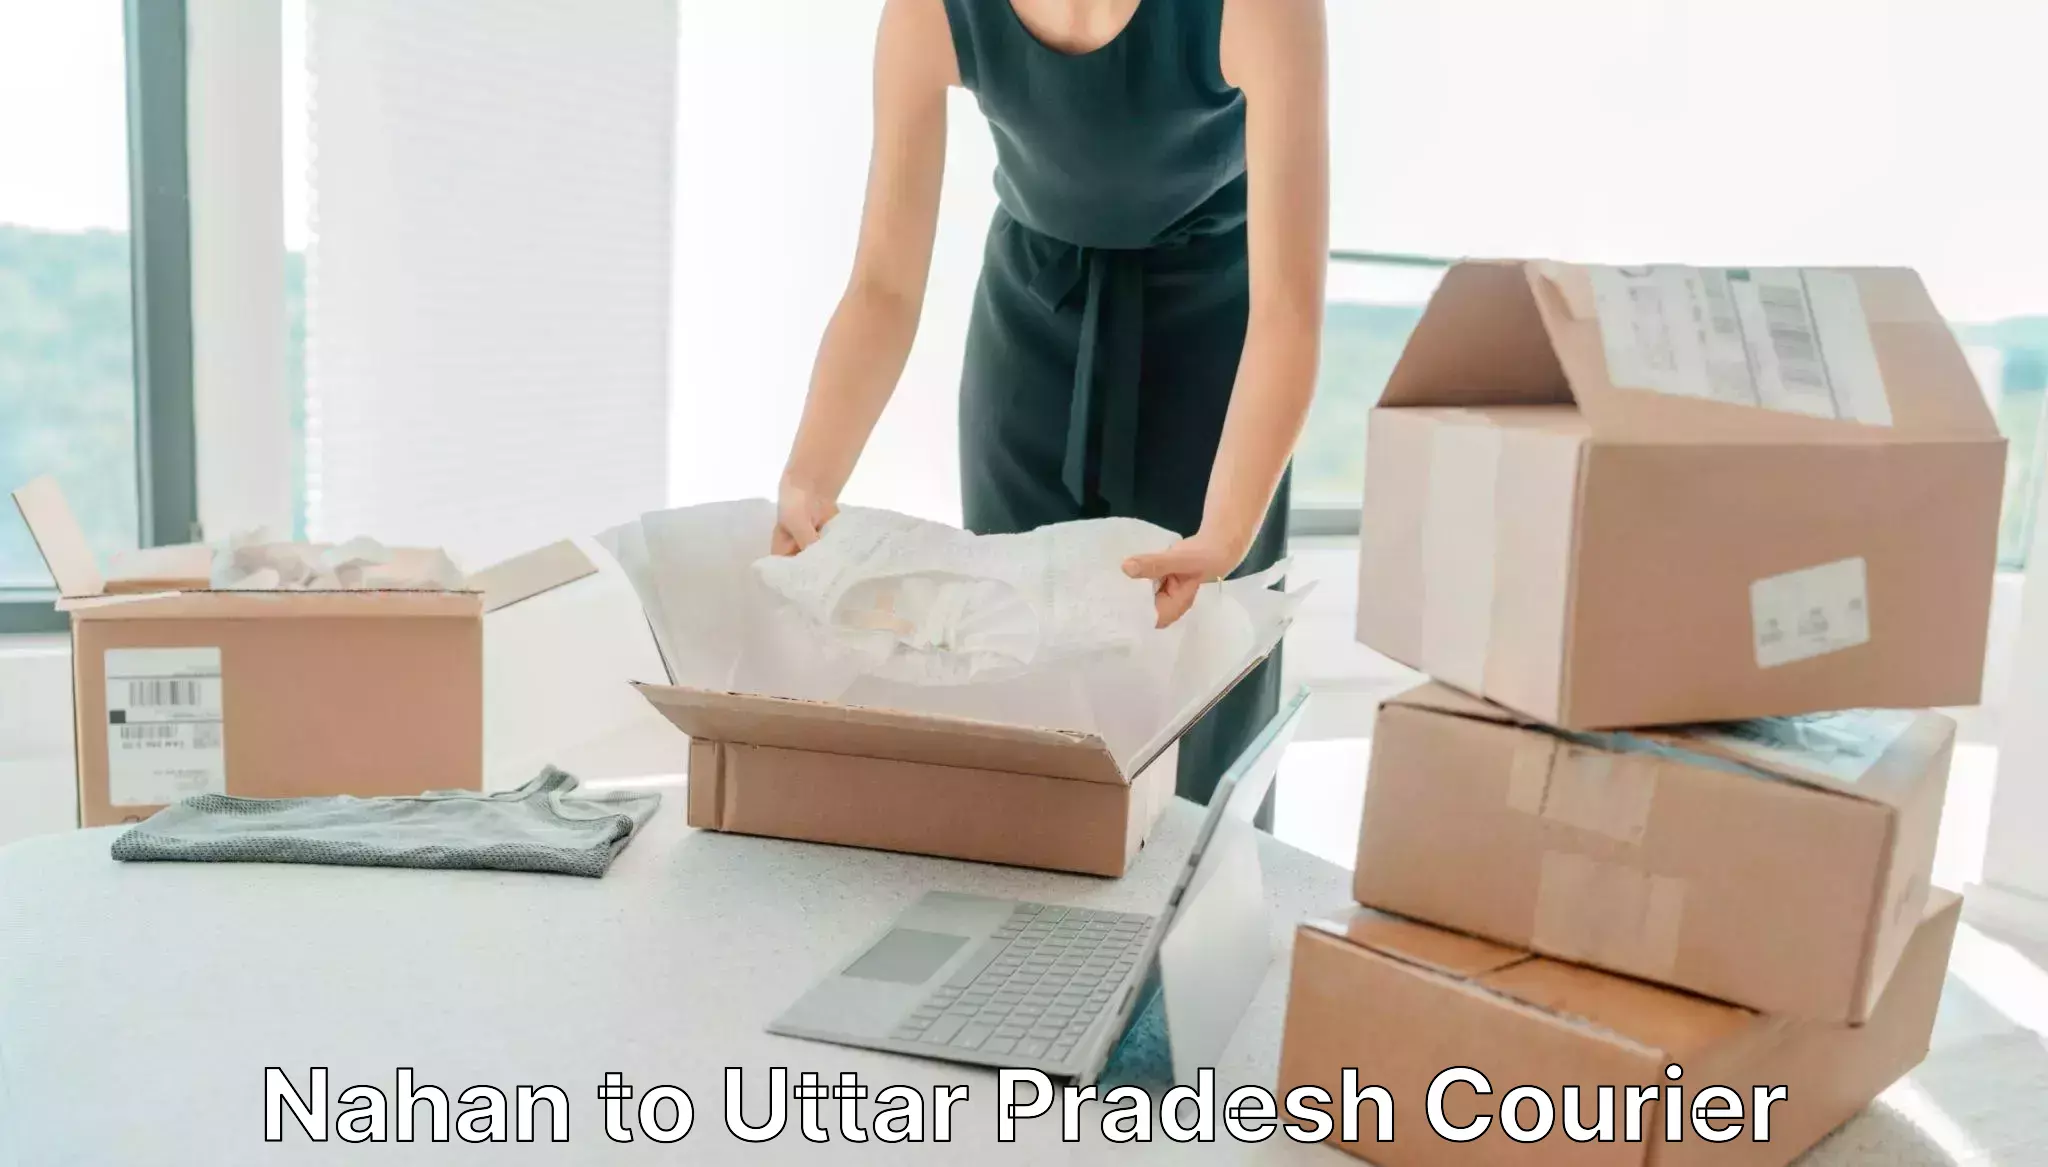 Lightweight parcel options Nahan to Ayodhya